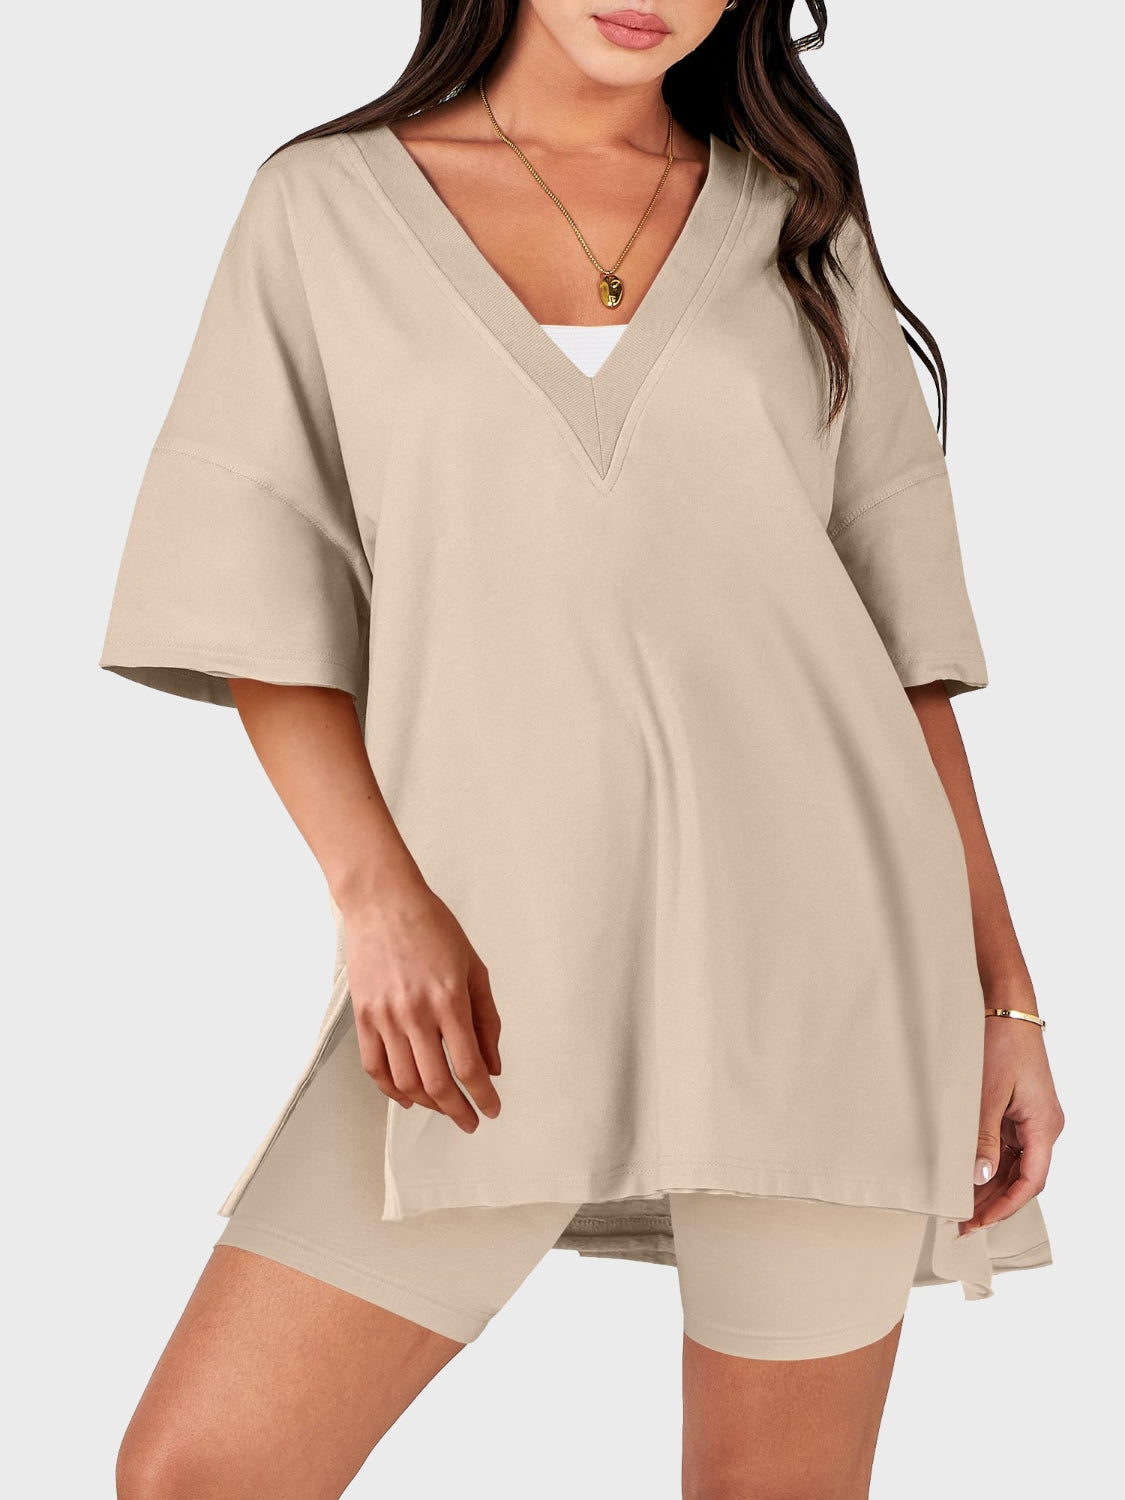 V-Neck Half Sleeve Top and Shorts Set *8 colors*